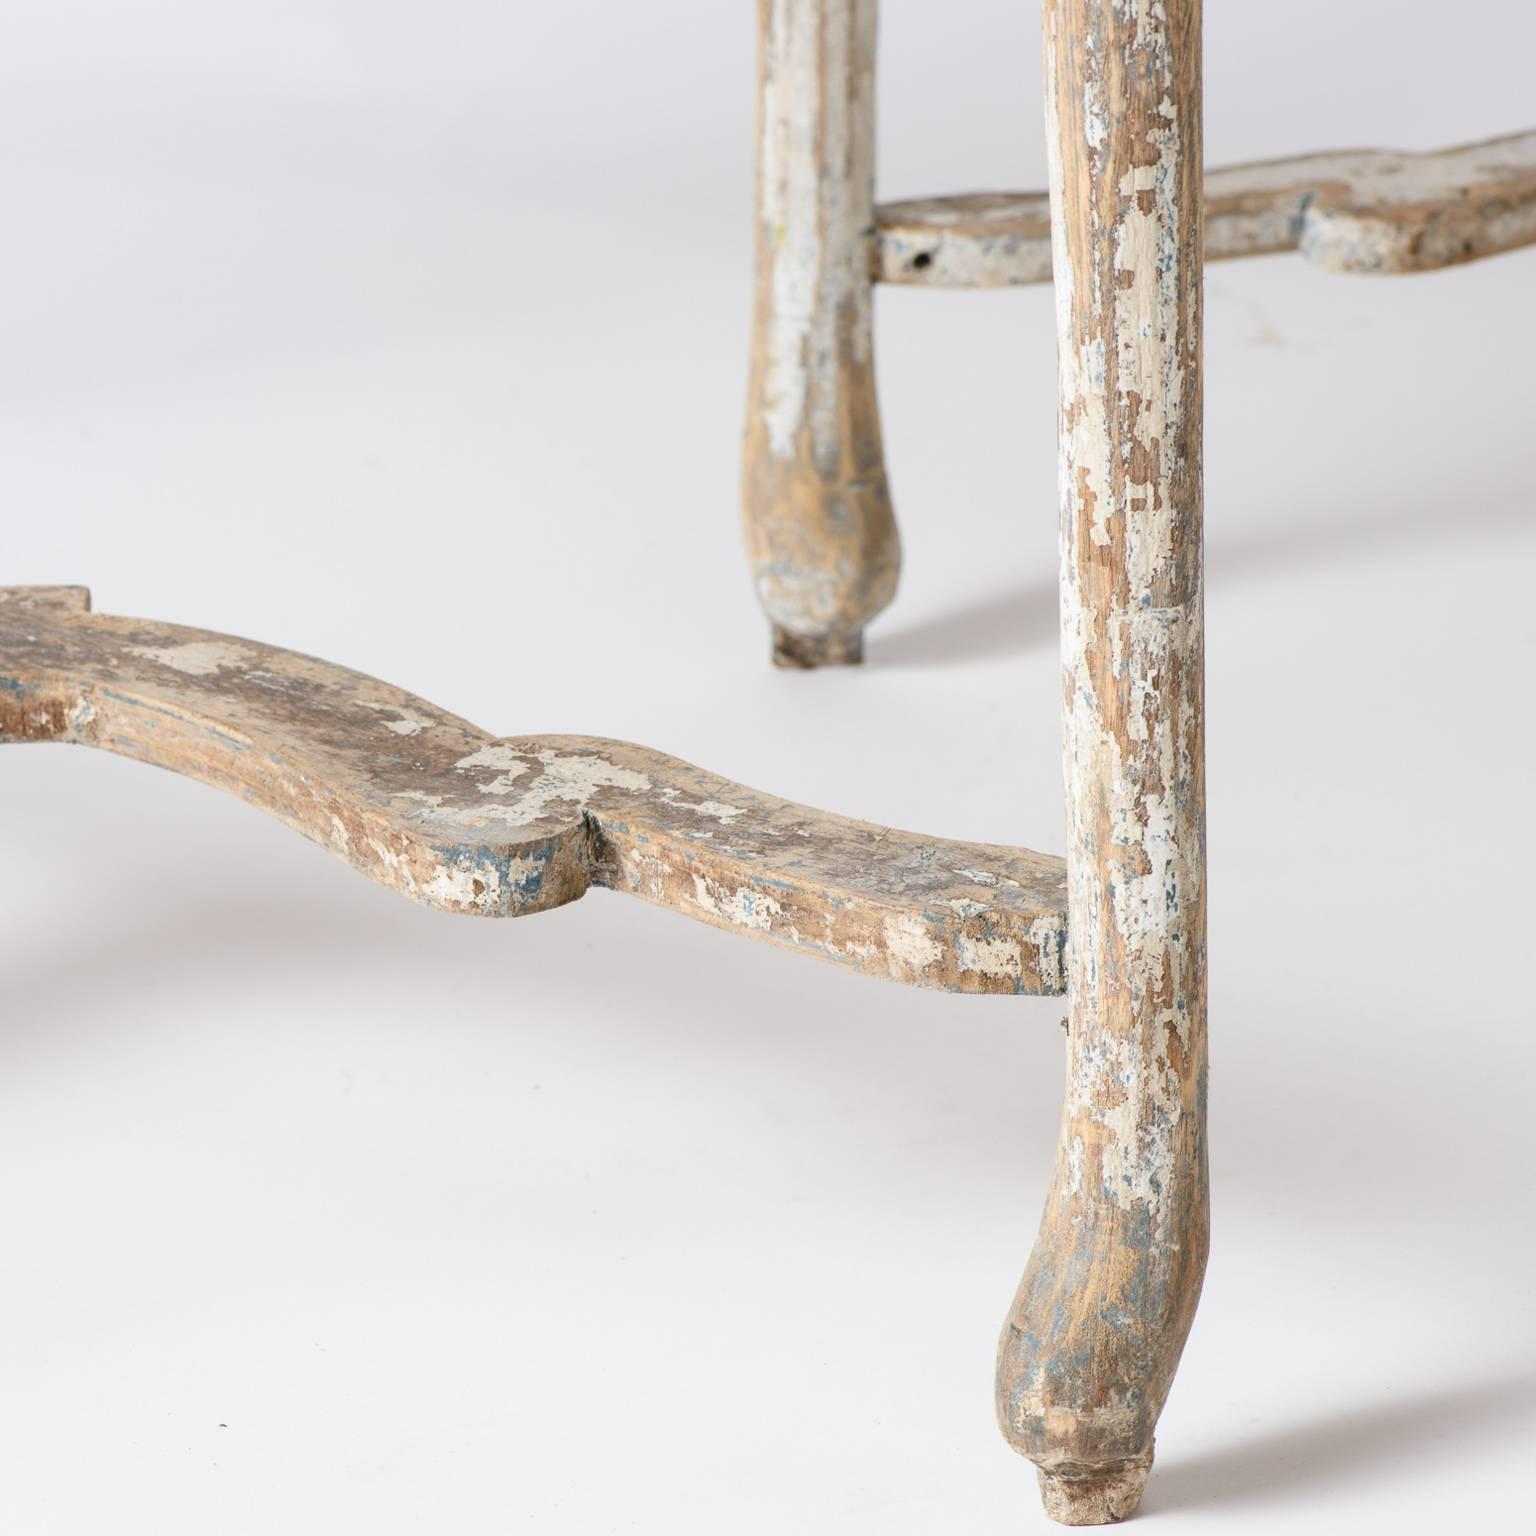 These demilune tables have the beautiful well-worn look only found on treasured pieces of furniture handed down over time. They have great form with curved legs and unique stretchers showing traces of old white paint. The scrubbed tops have a lovely